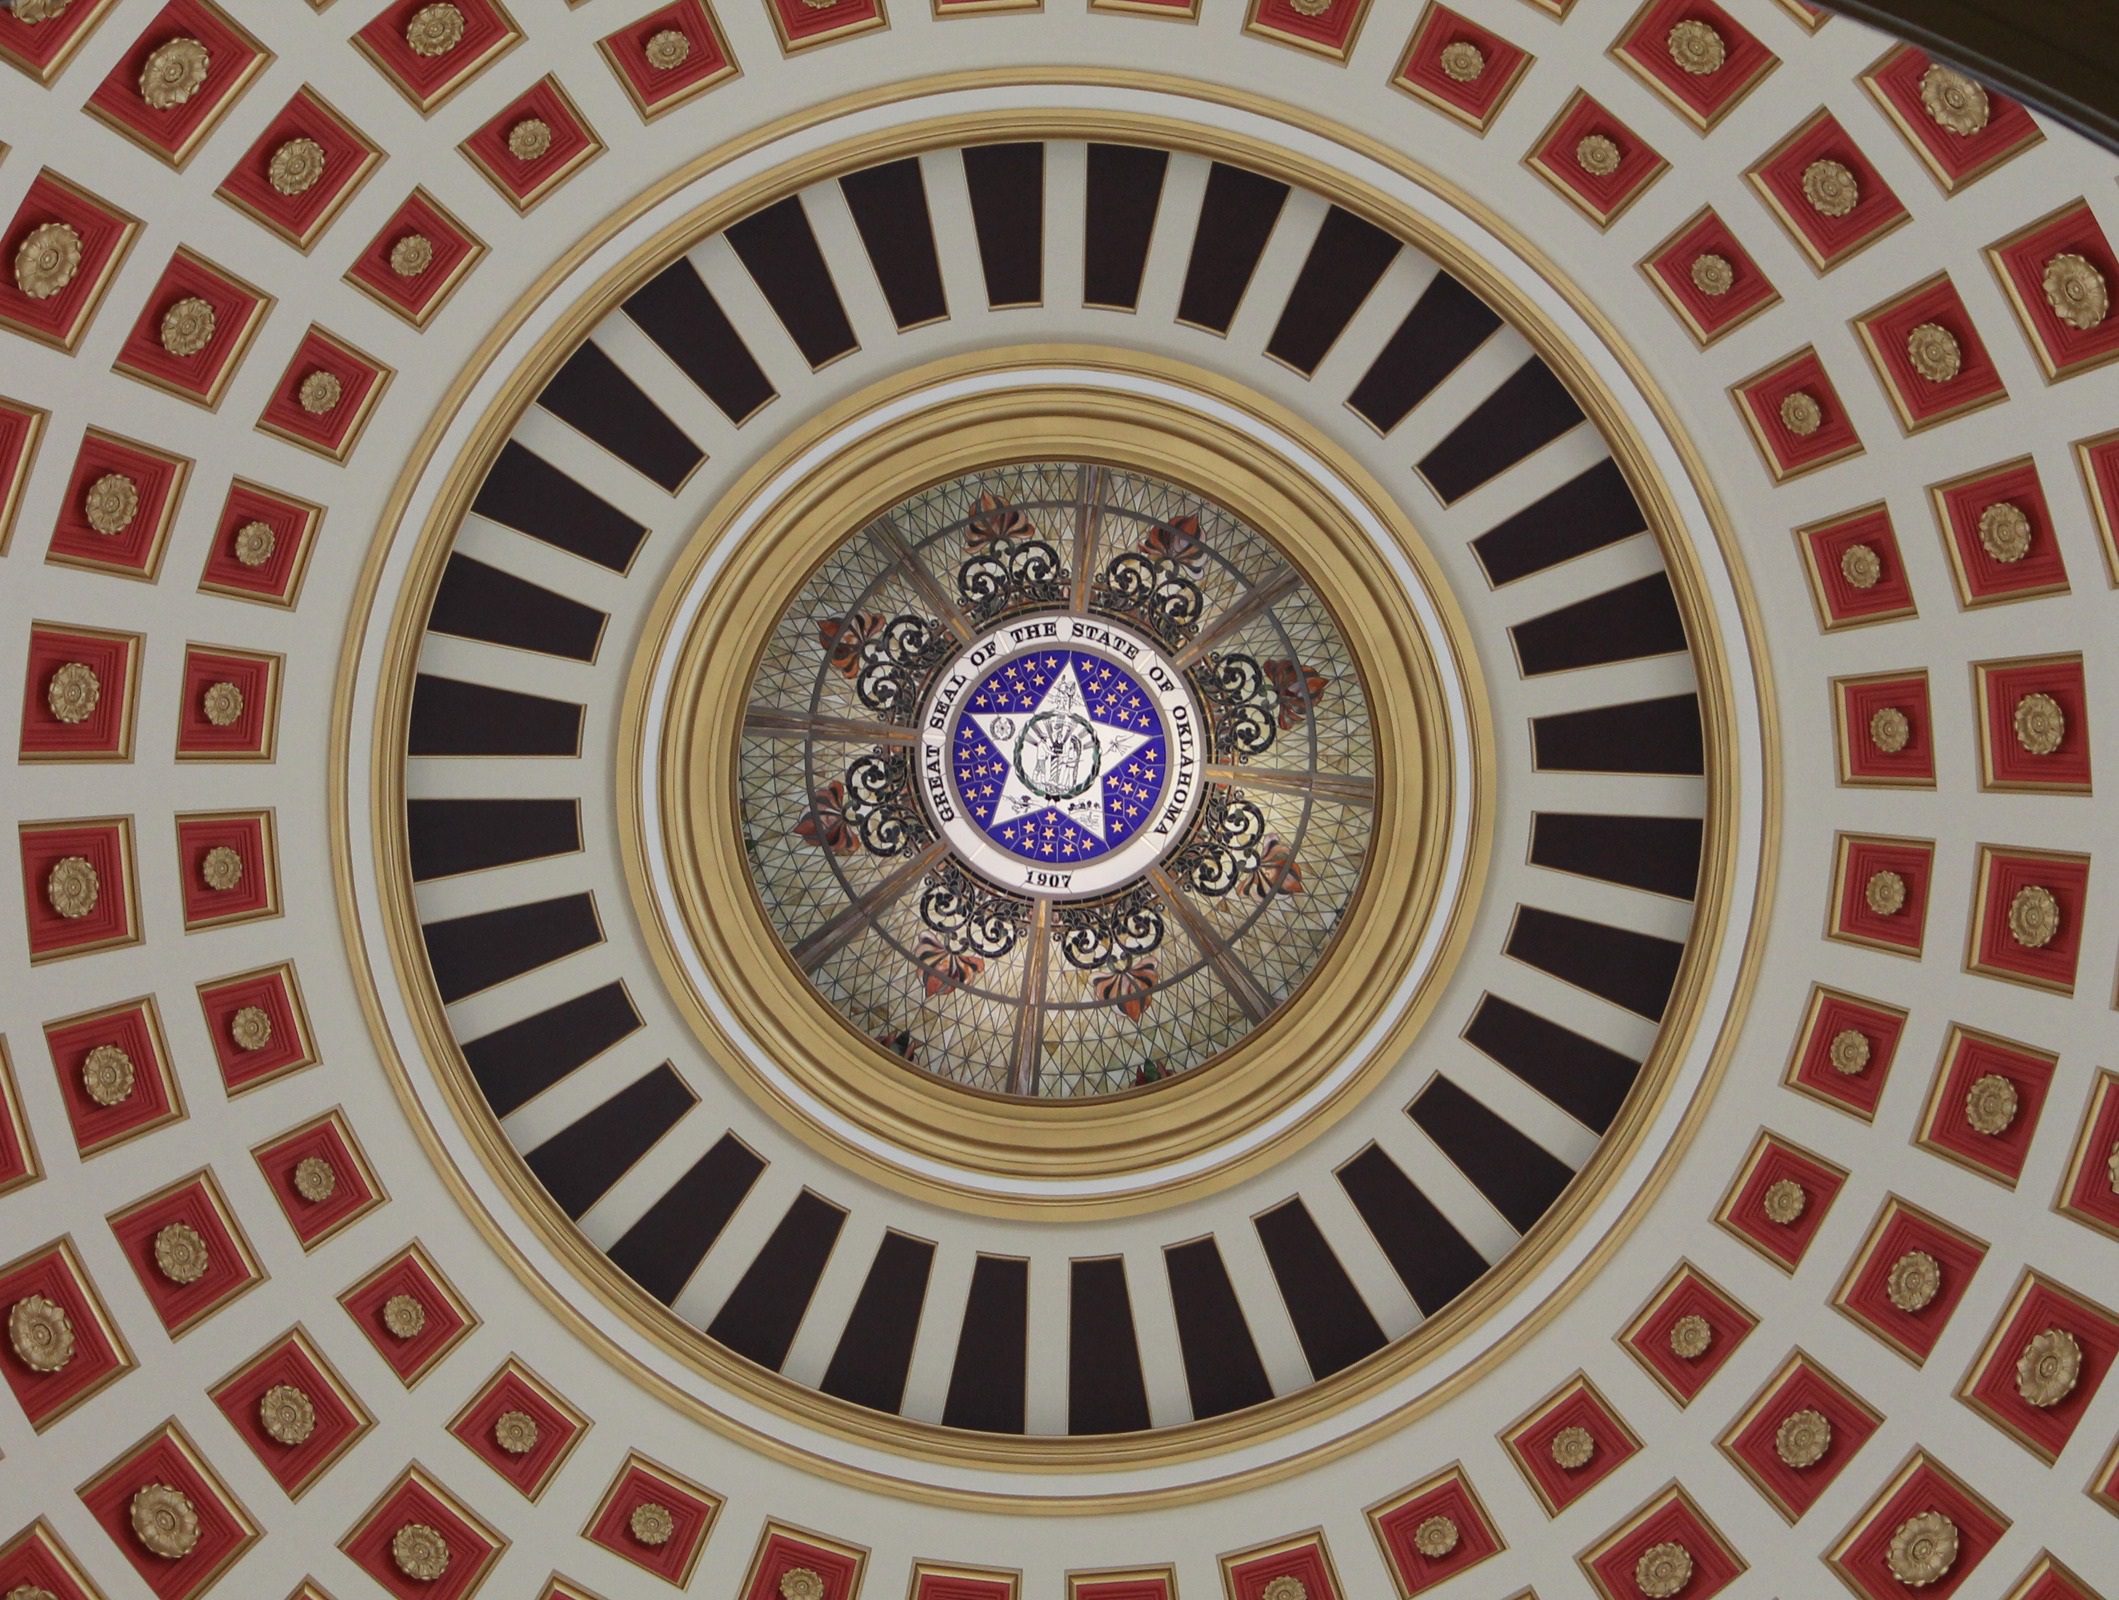 Inside view of Oklahoma State Capitol dome